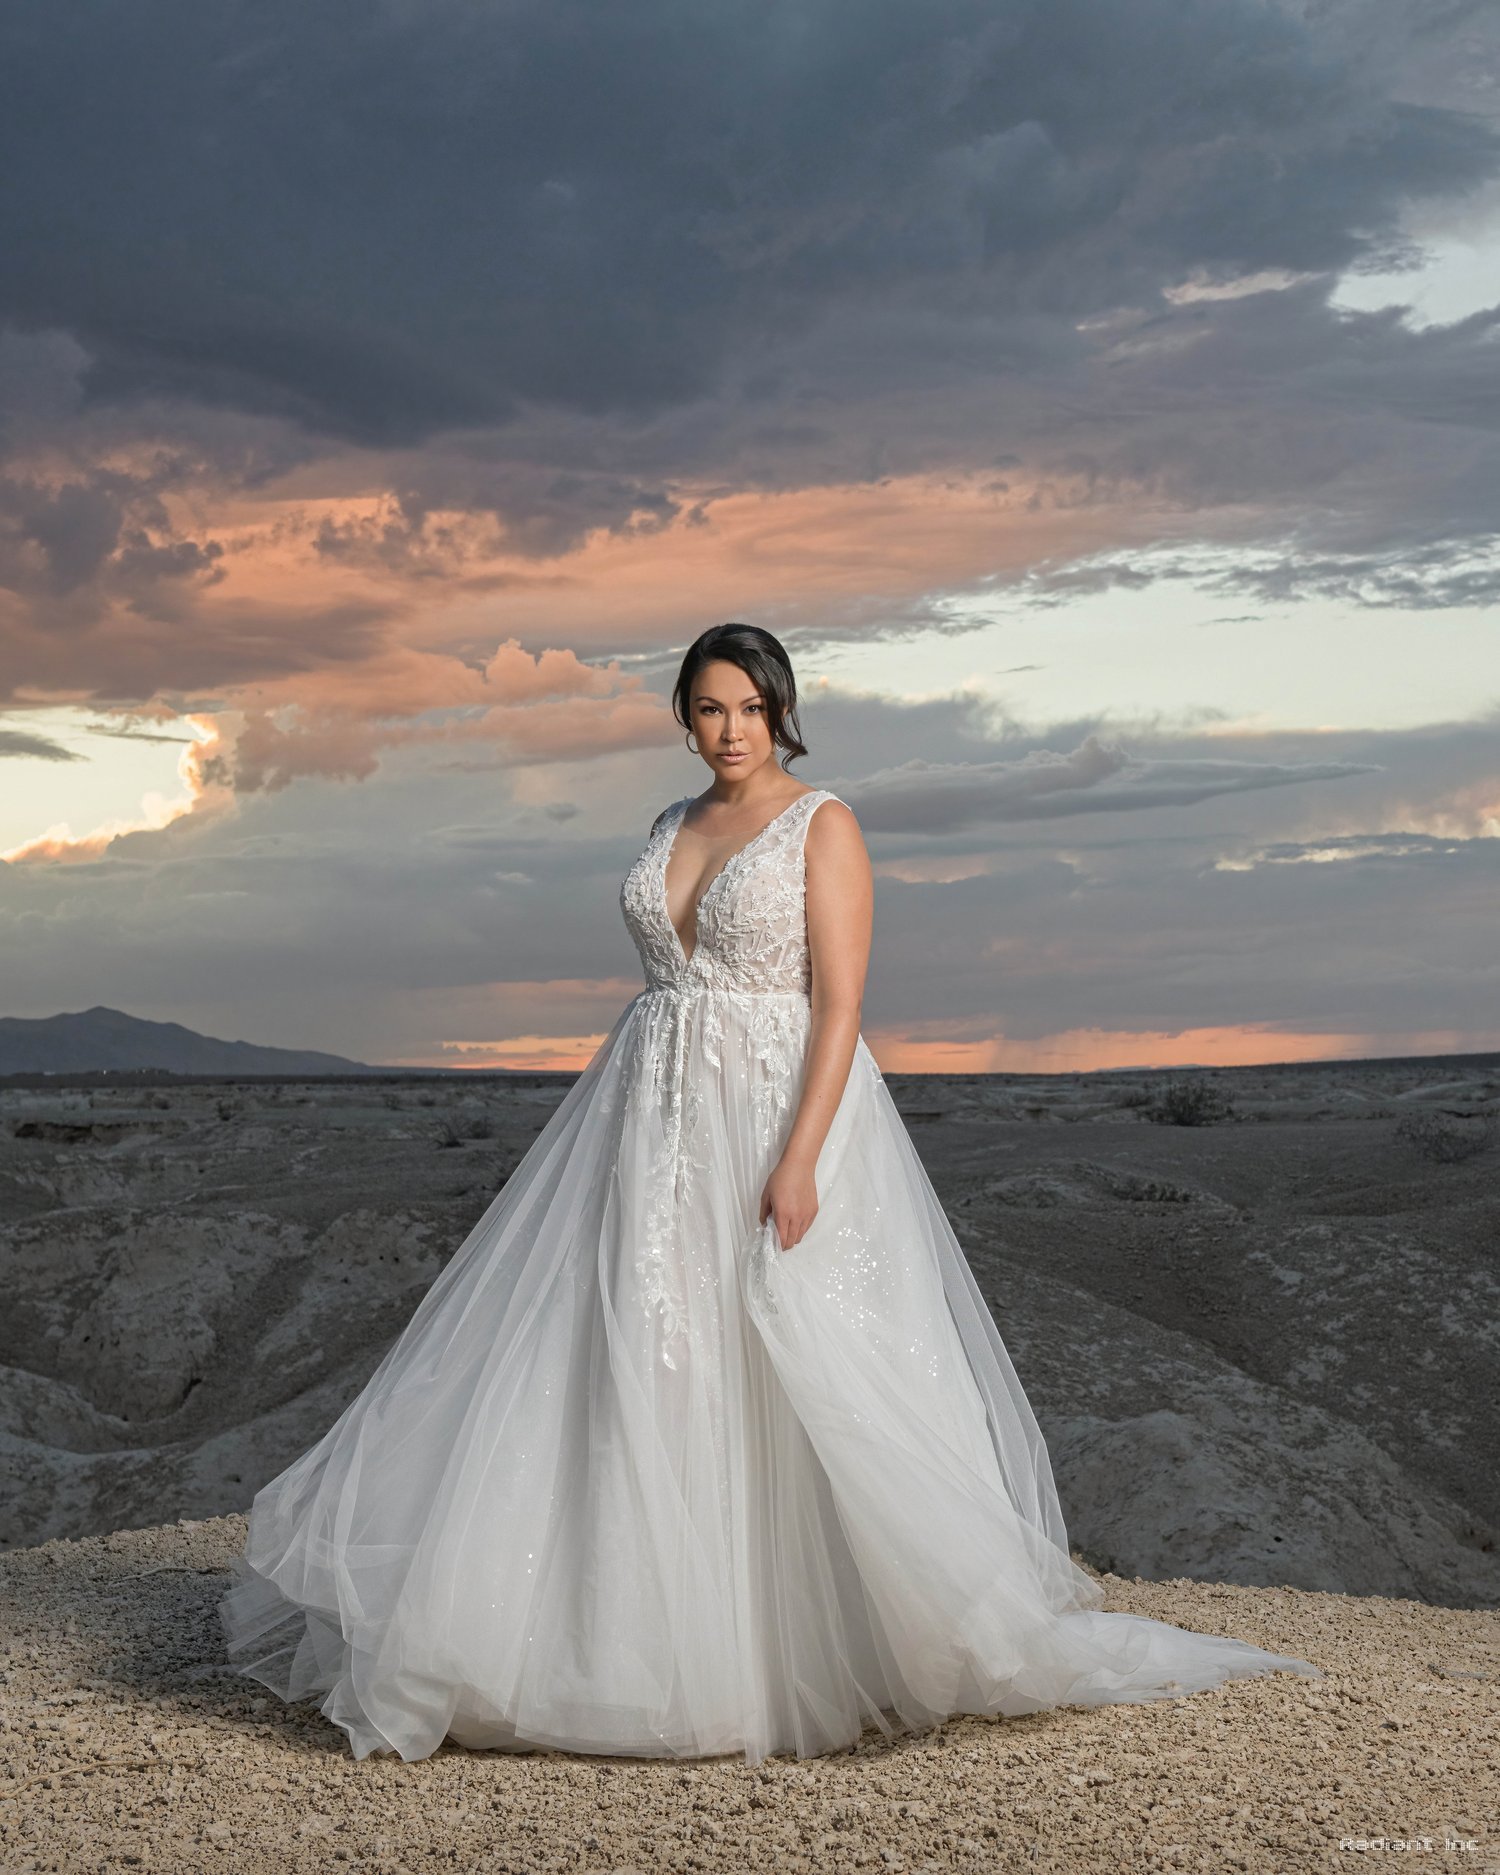 Dany-Tabet-Girl-Bridal-Plus-Size-Curvy-Wedding-Dresses-Indiana-Illinois-New-Jersey-Brides-by-Young-True.jpeg